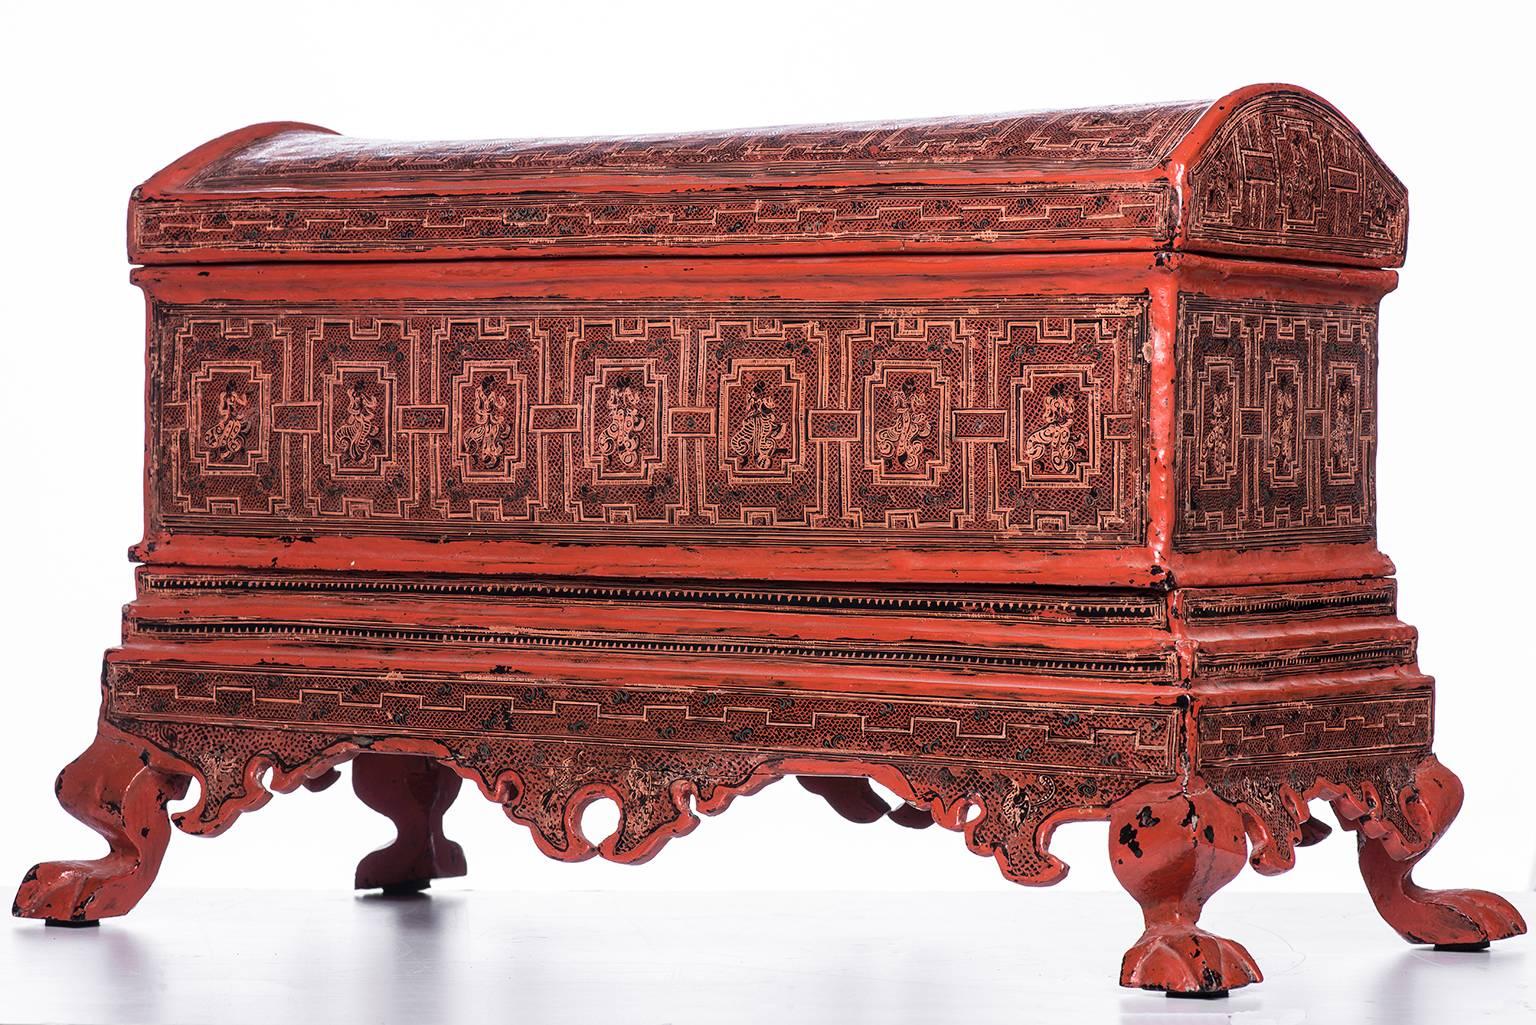  Splendid and vintage Burmese Box, red  lacquered and engraved, unusual size.
O/5307 -